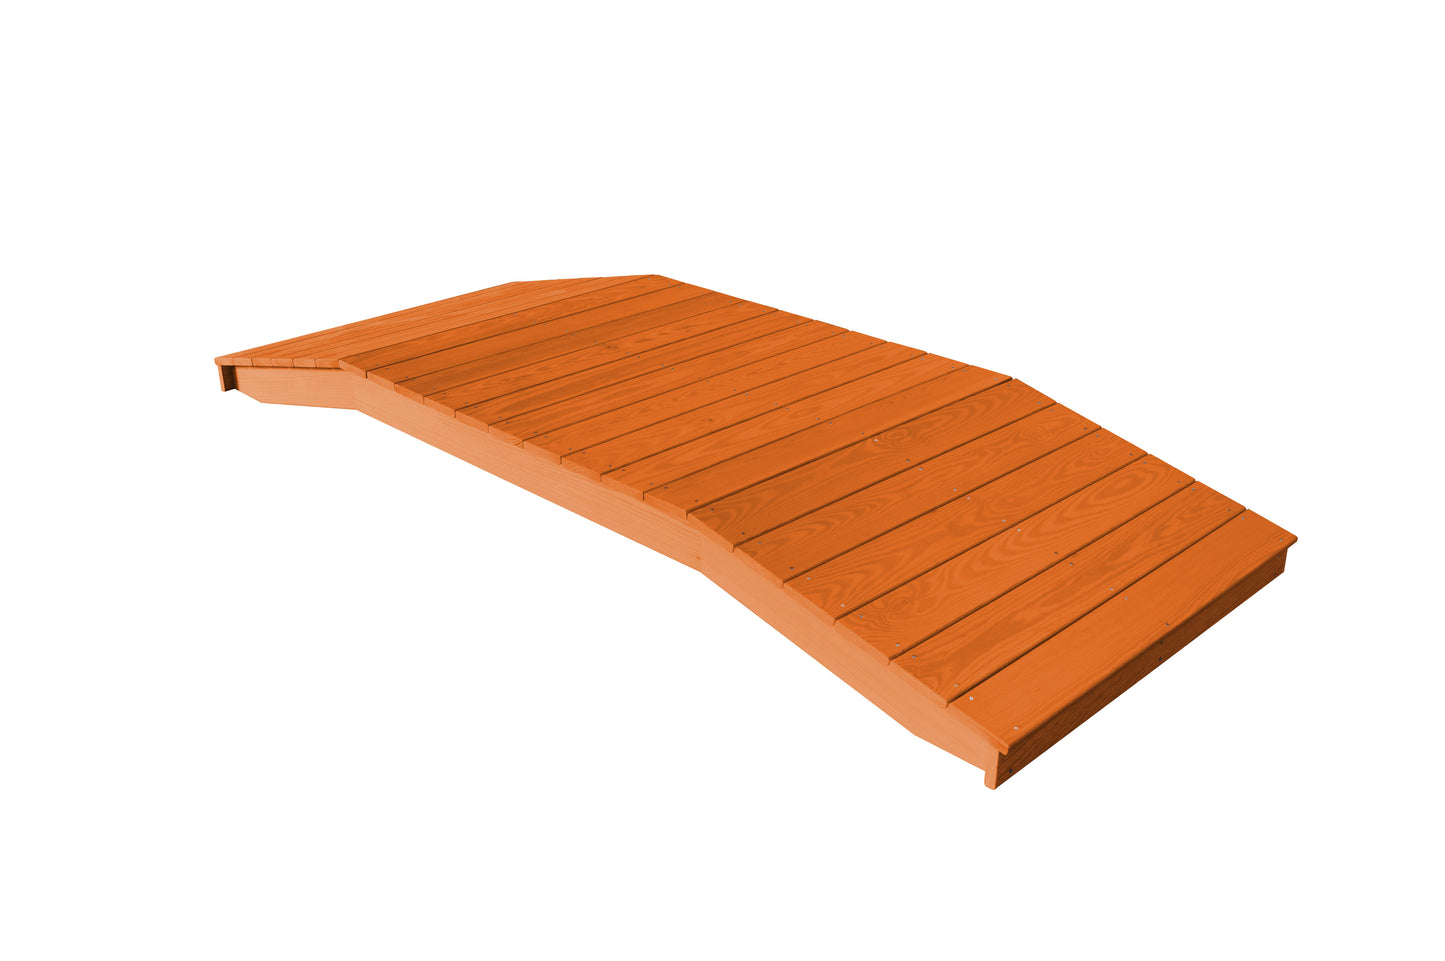 A&L Furniture Pressure Treated Pine 4'  x  10' Standard Plank Bridge - LEAD TIME TO SHIP 10 BUSINESS DAY